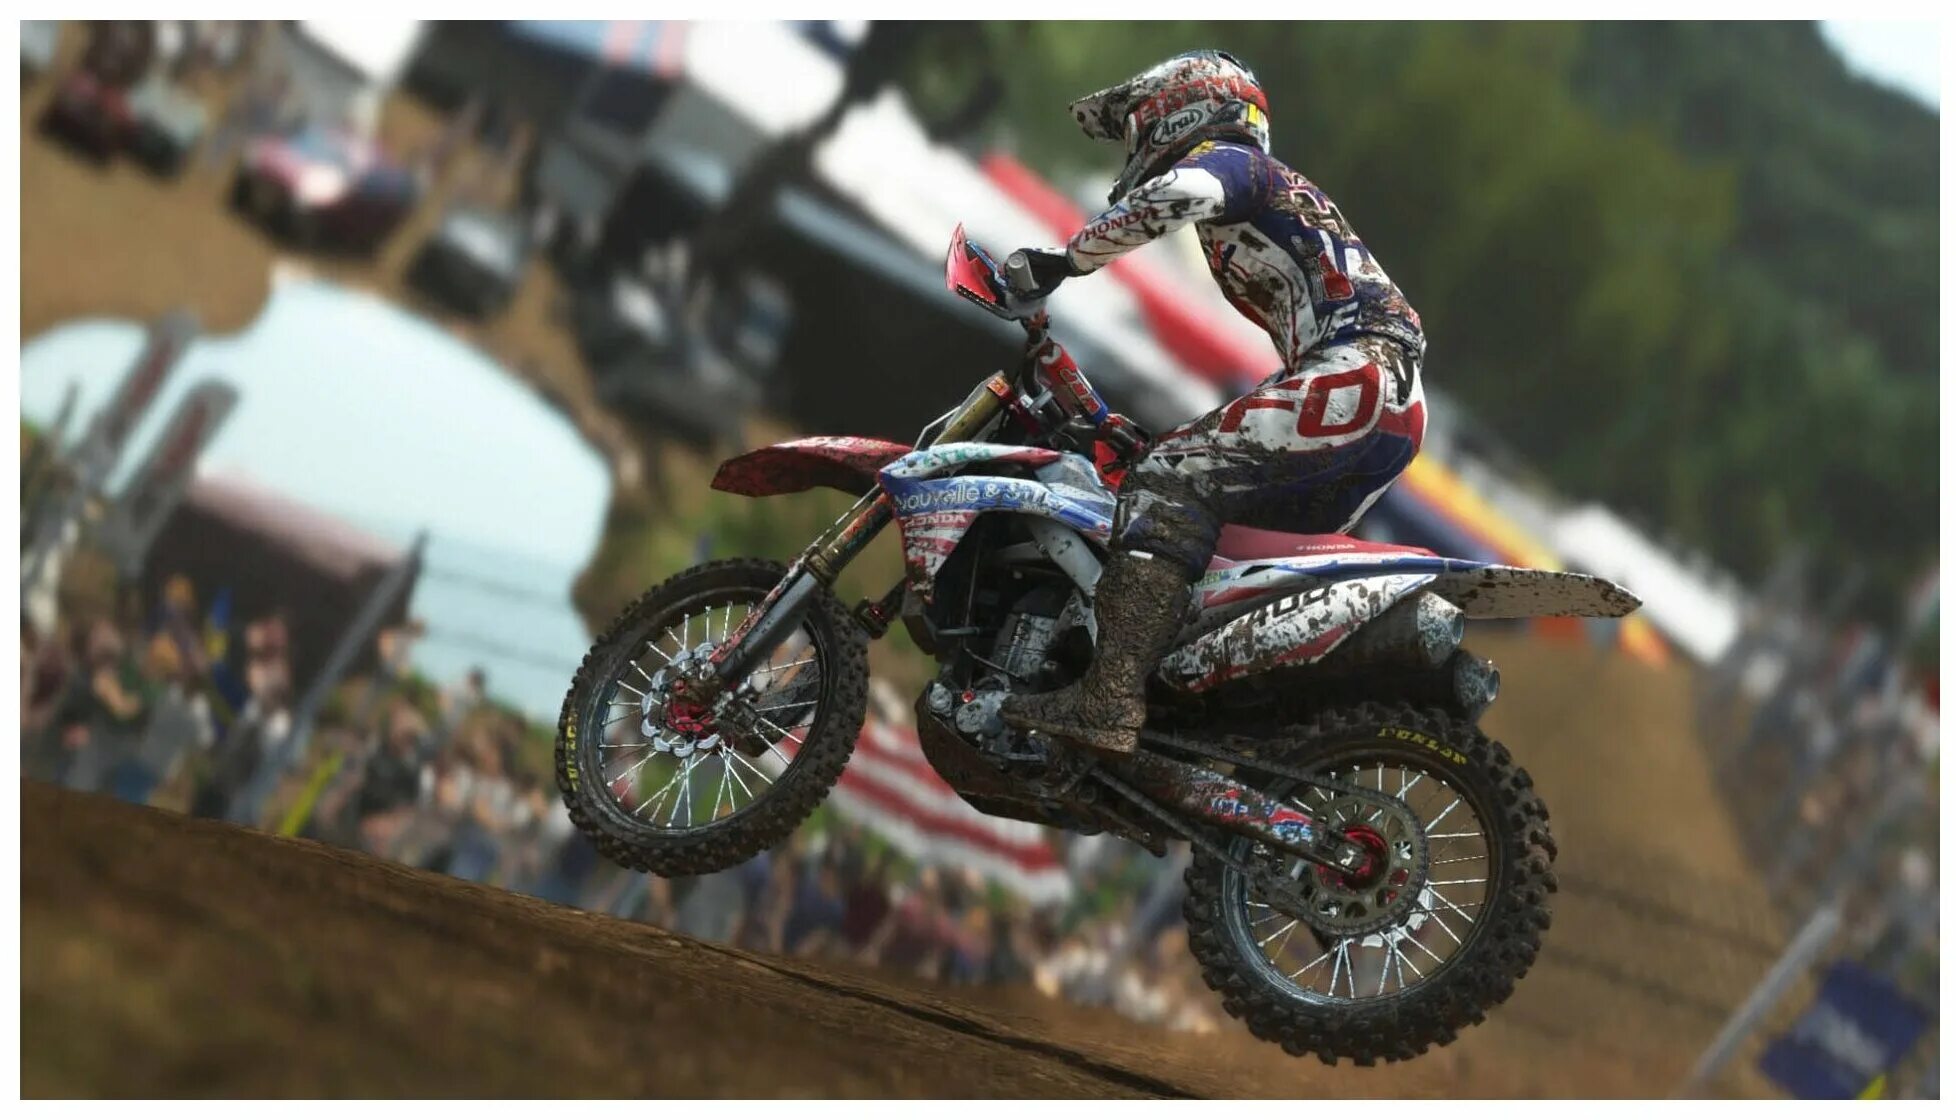 MXGP the Official Motocross videogame. Mxgp2 - the Official Motocross videogame. MXGP - the Official Motocross videogame Compact. Ps4 MXGP 2 the Official Motocross. Motocross videogame